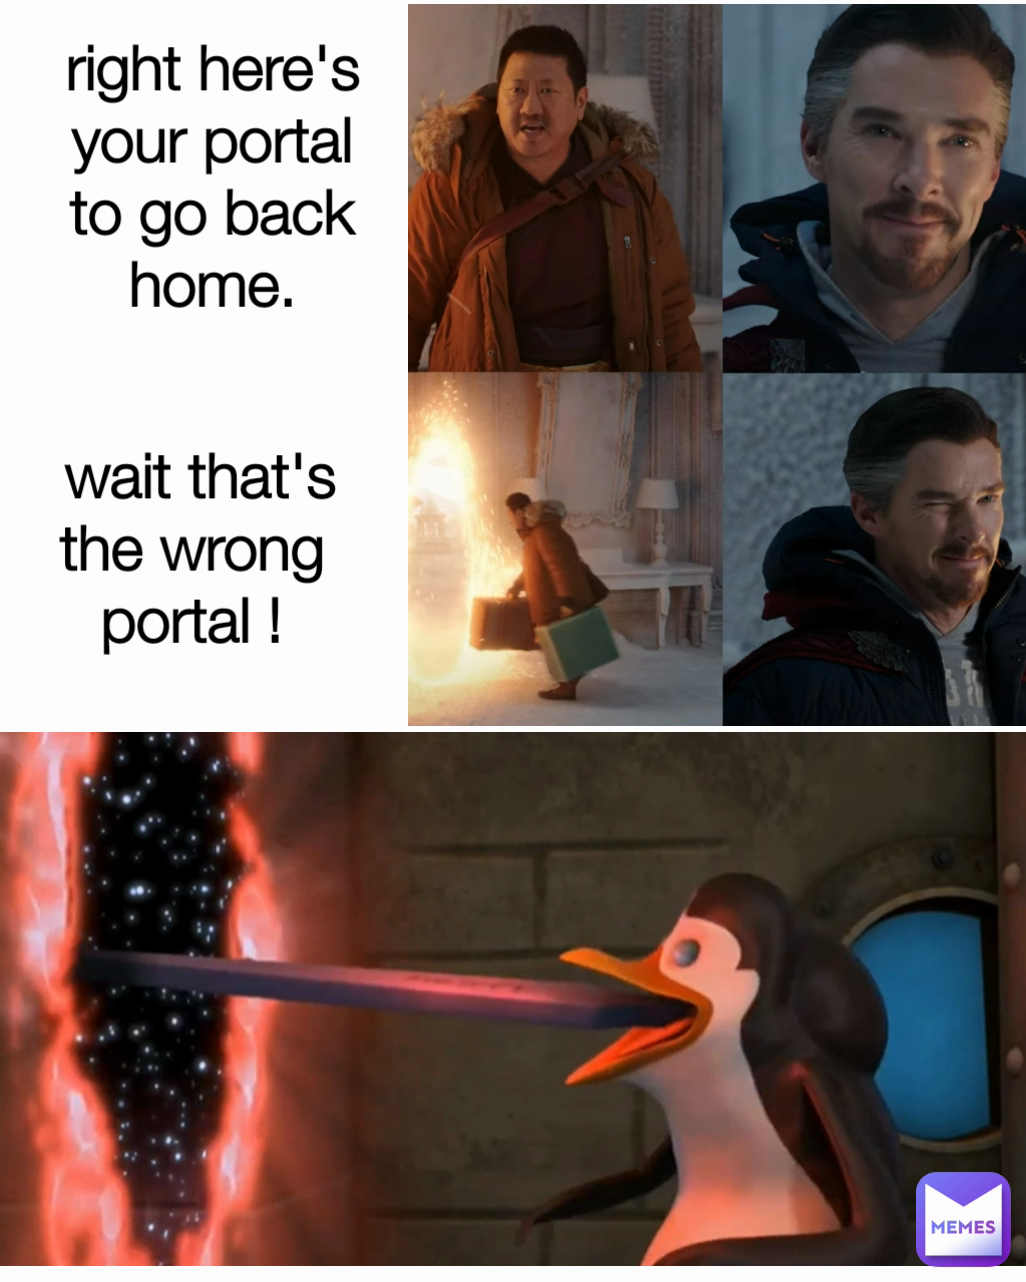  wait that's the wrong portal ! Type Text right here's your portal to go back home.